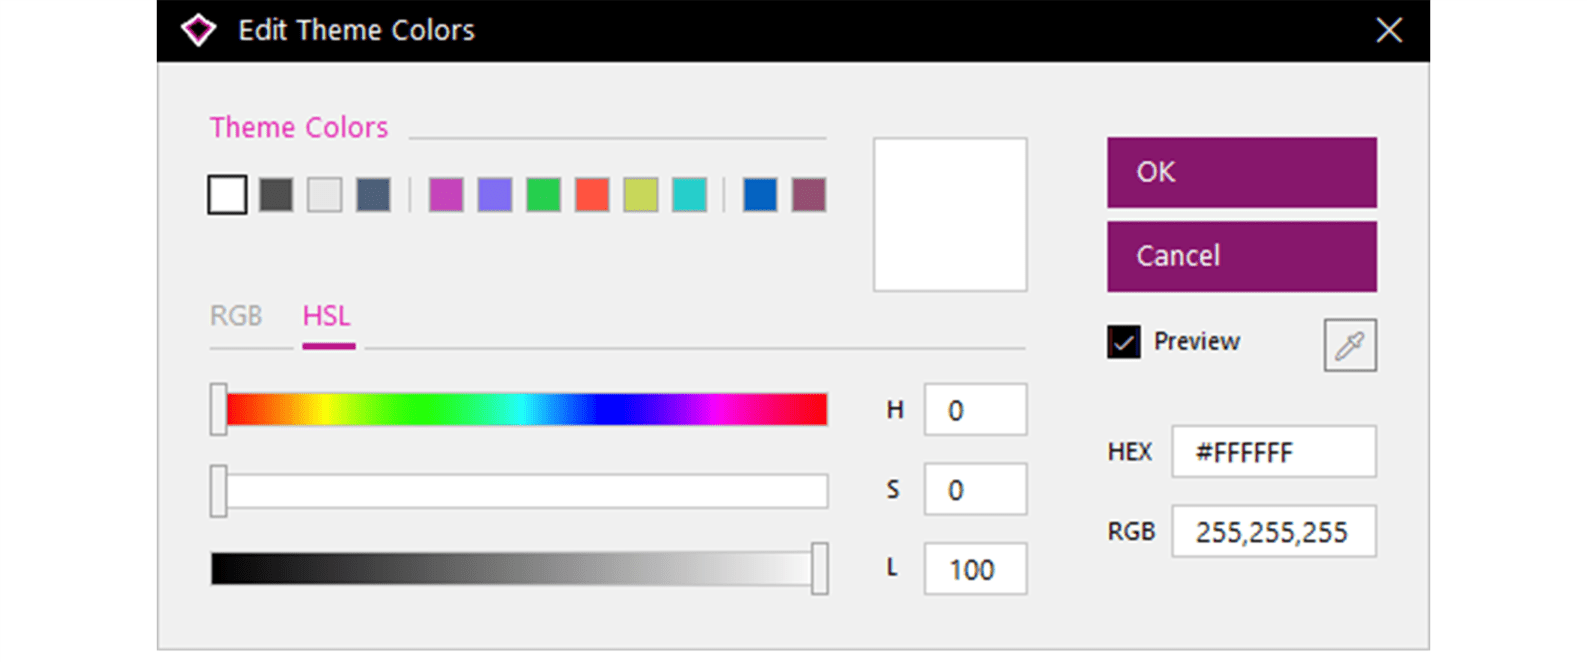 Screenshot of the Edit Theme Colors pop up window from our PowerPoint add-in BrightSlide